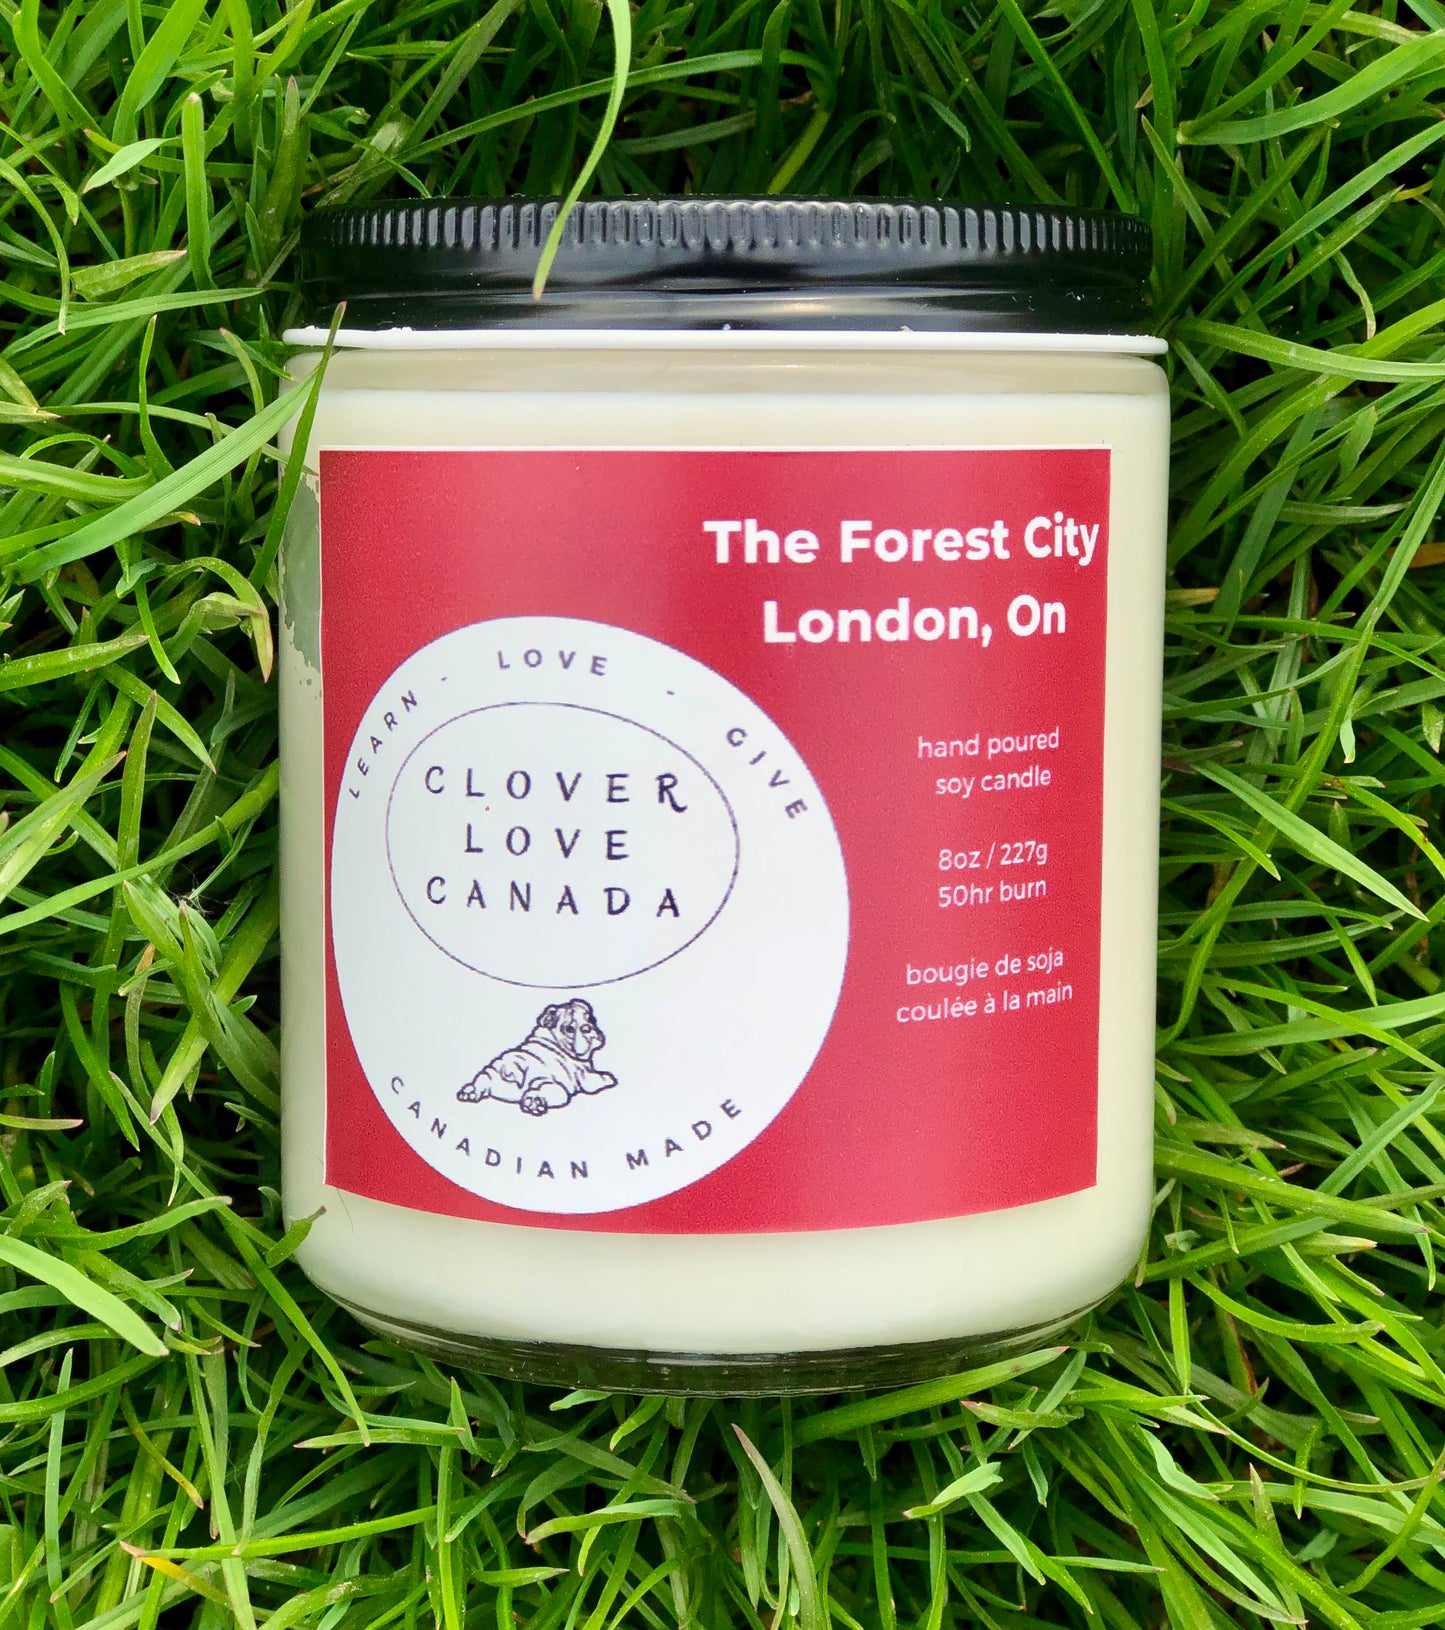 8 oz candle in grass with red label The Forest City London  On